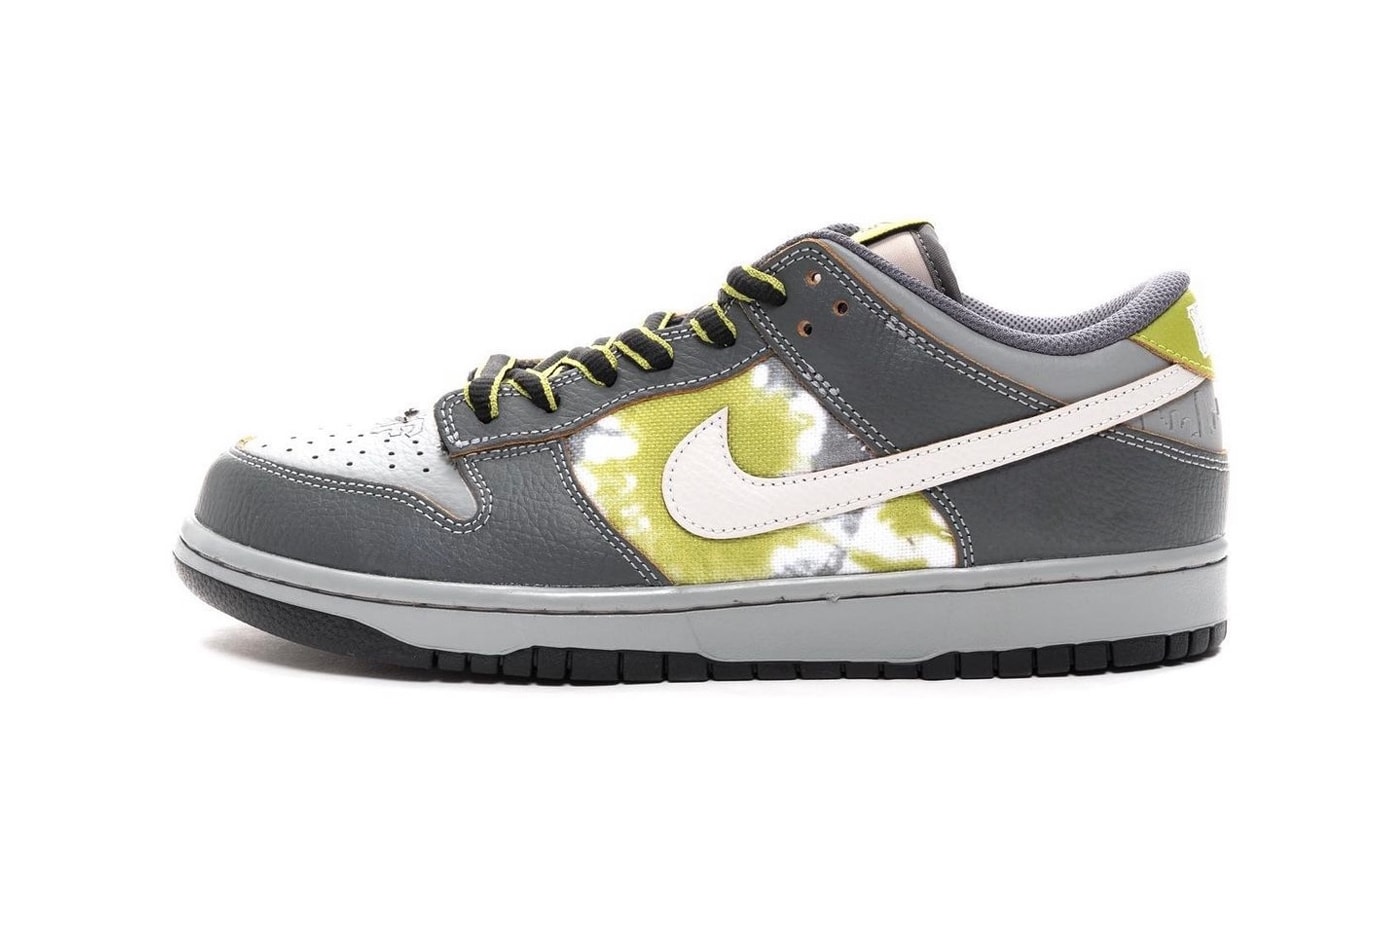 HUF Nike SB Dunk Low Collaboration Full Look Images NYC San Francisco Friends Family Release Info